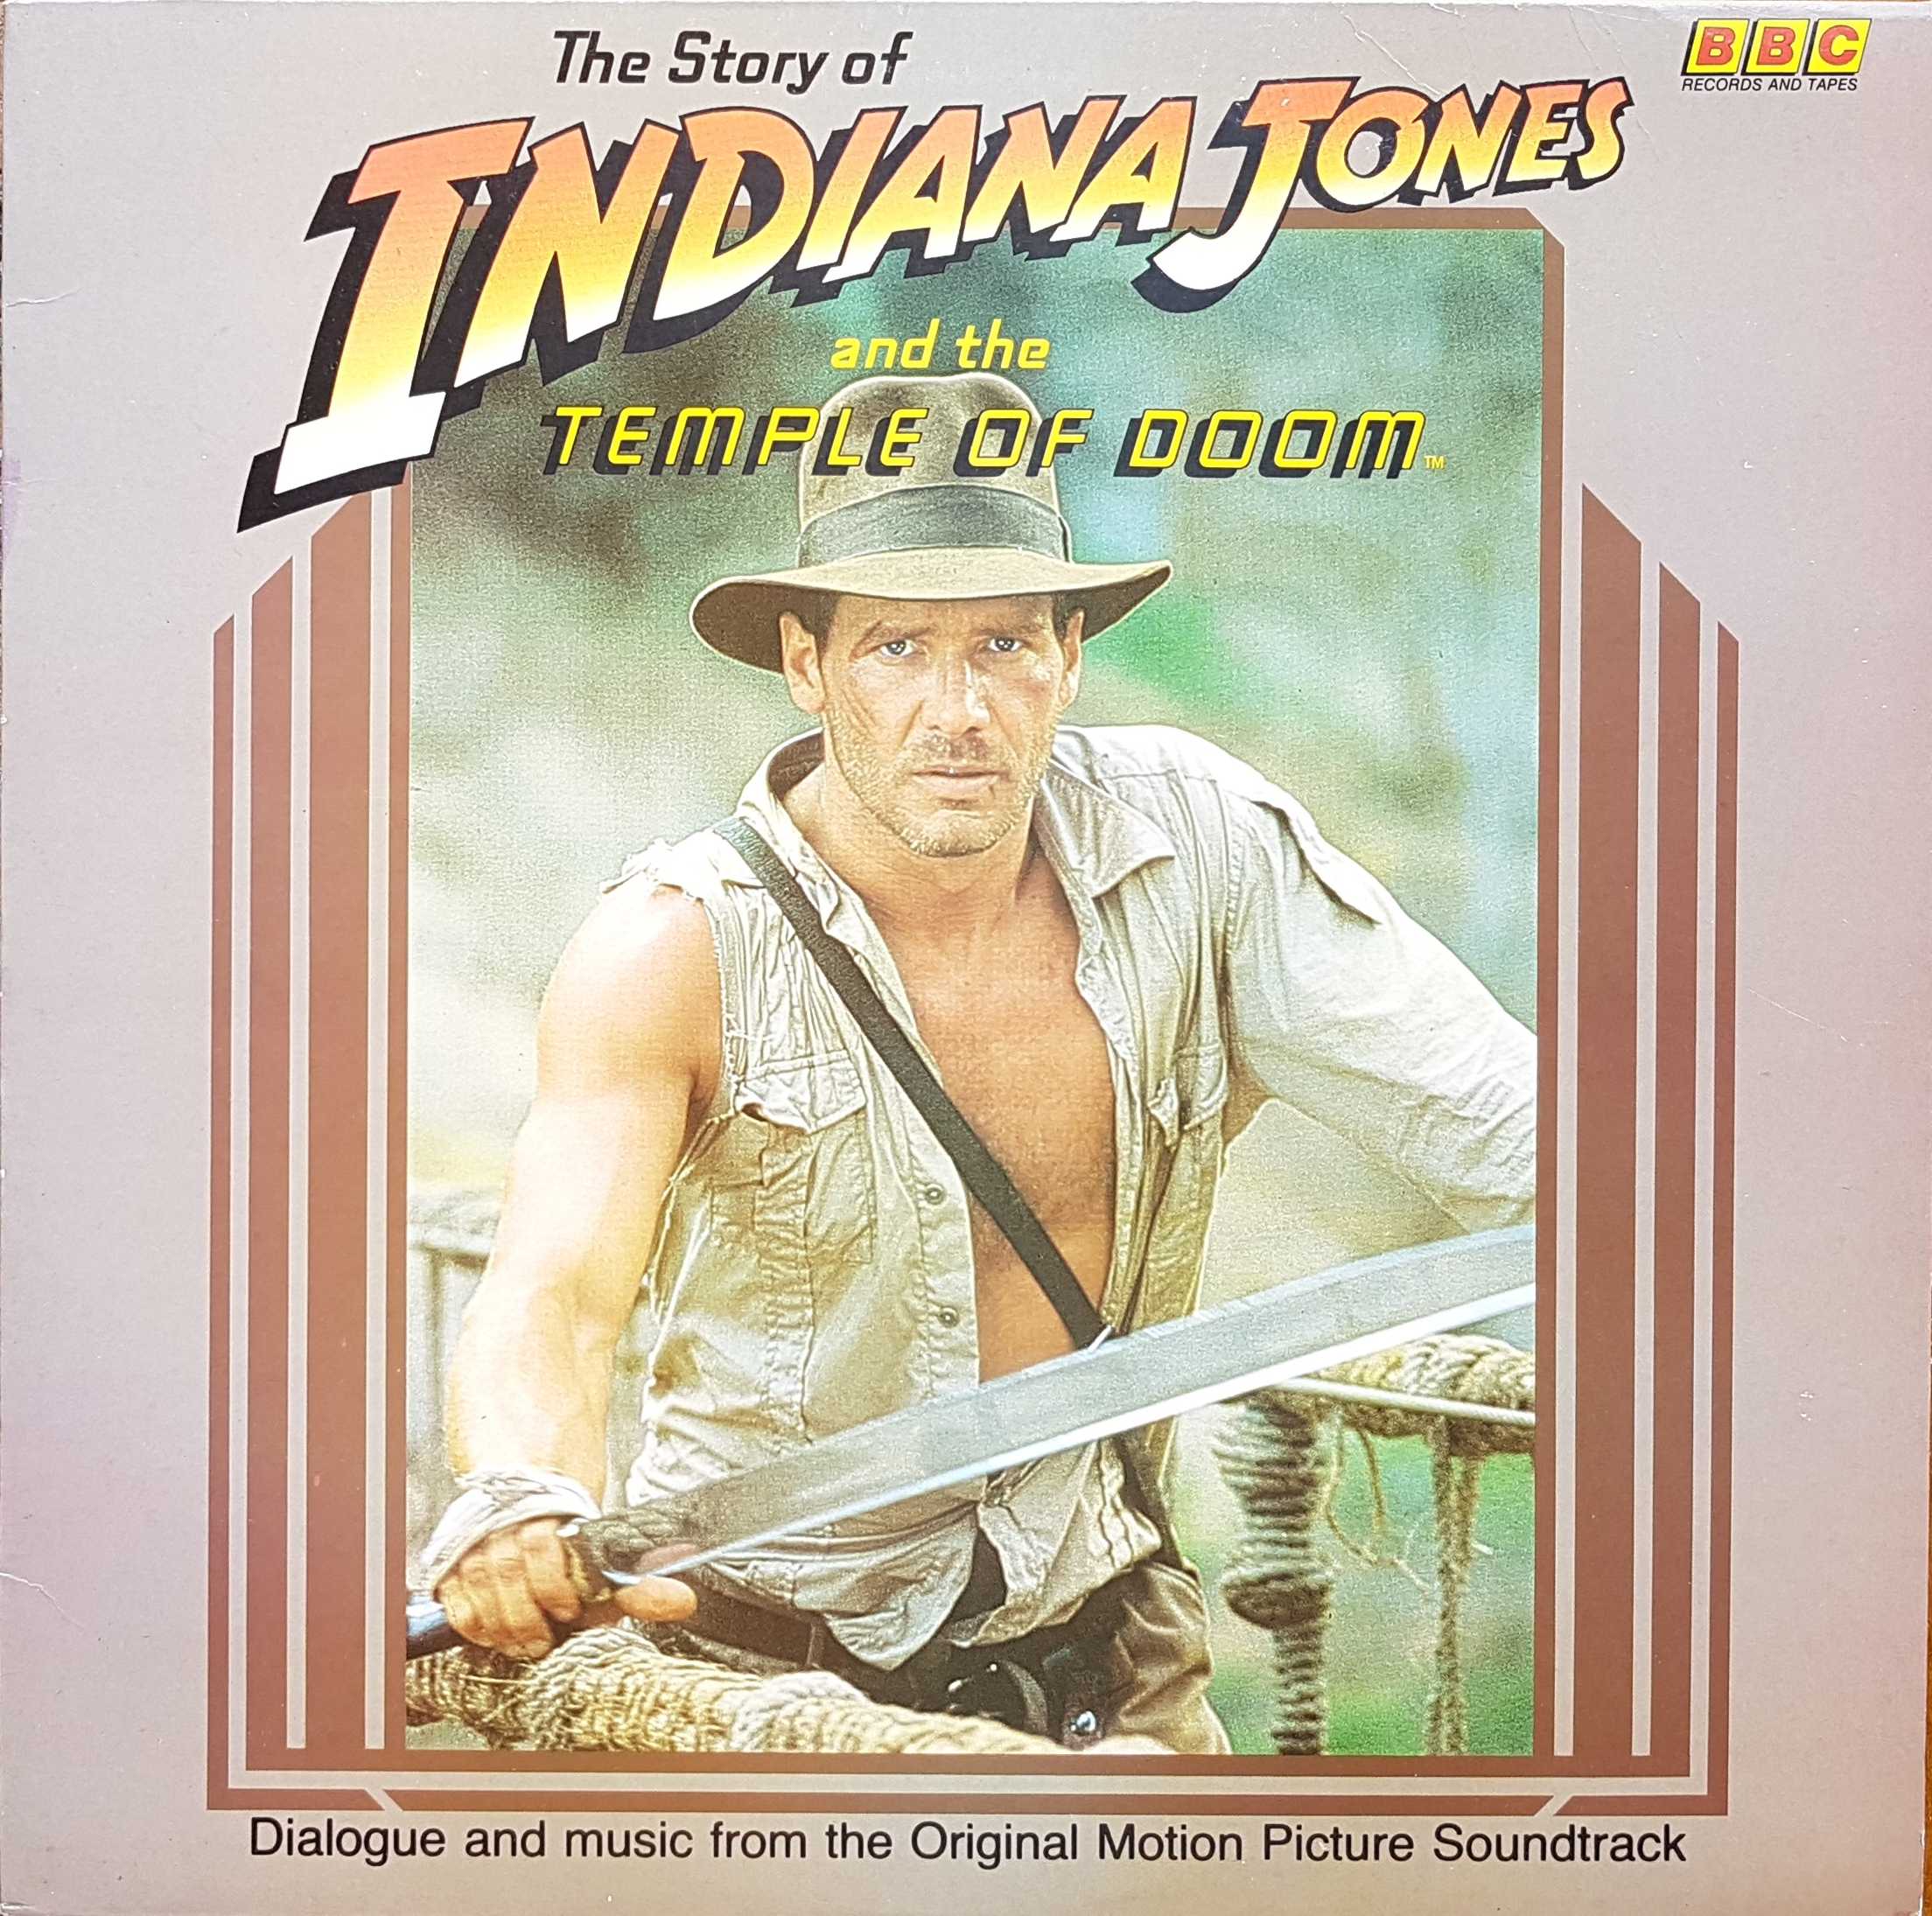 Picture of REH 543 Indiana Jones and the temple of doom by artist John Williams from the BBC albums - Records and Tapes library